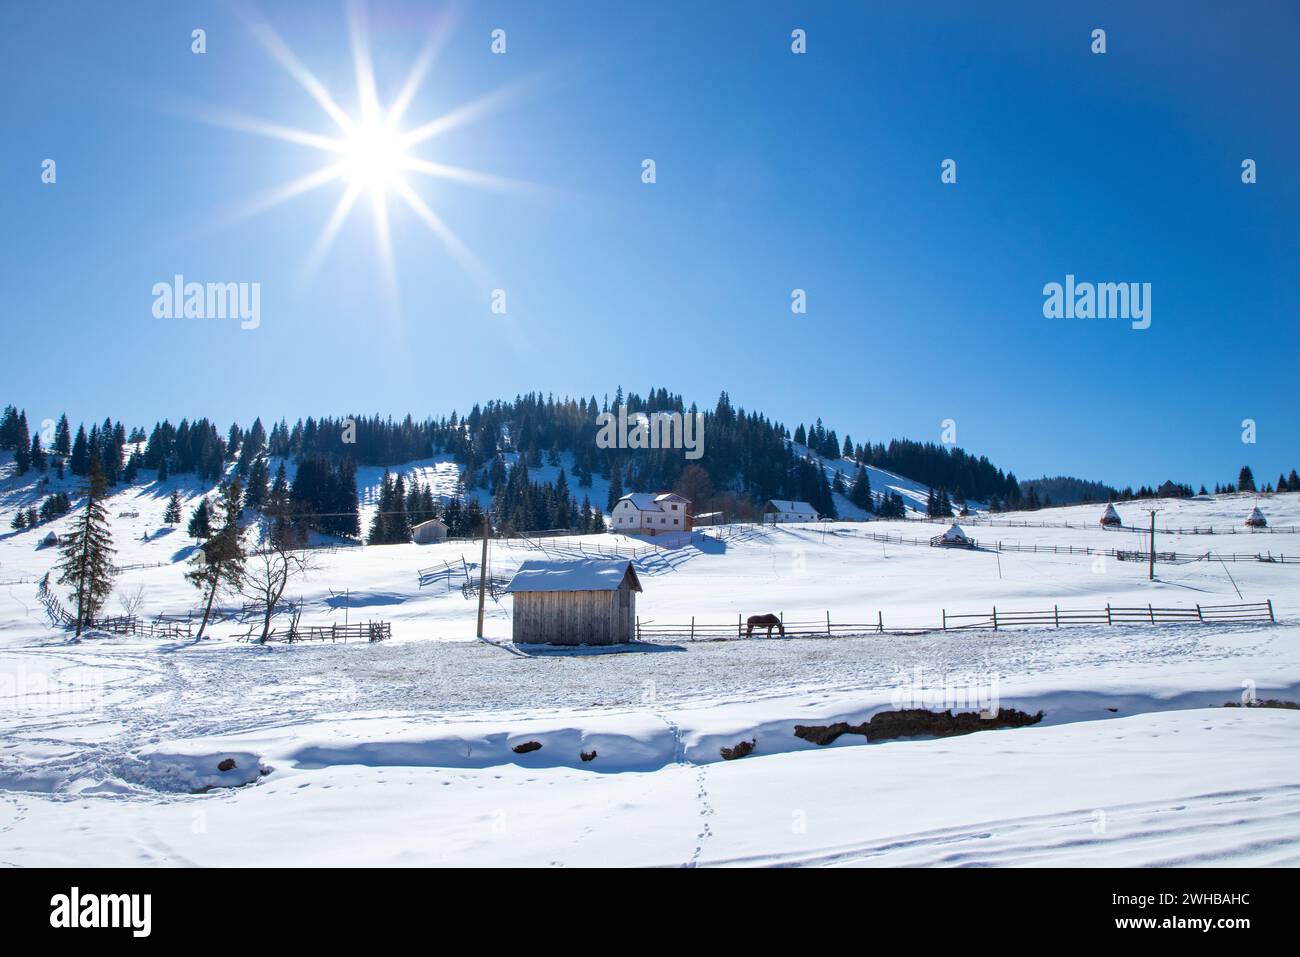 Sunrise over snowy mountain landscape with mountains in the background and a house in the foreground Stock Photo